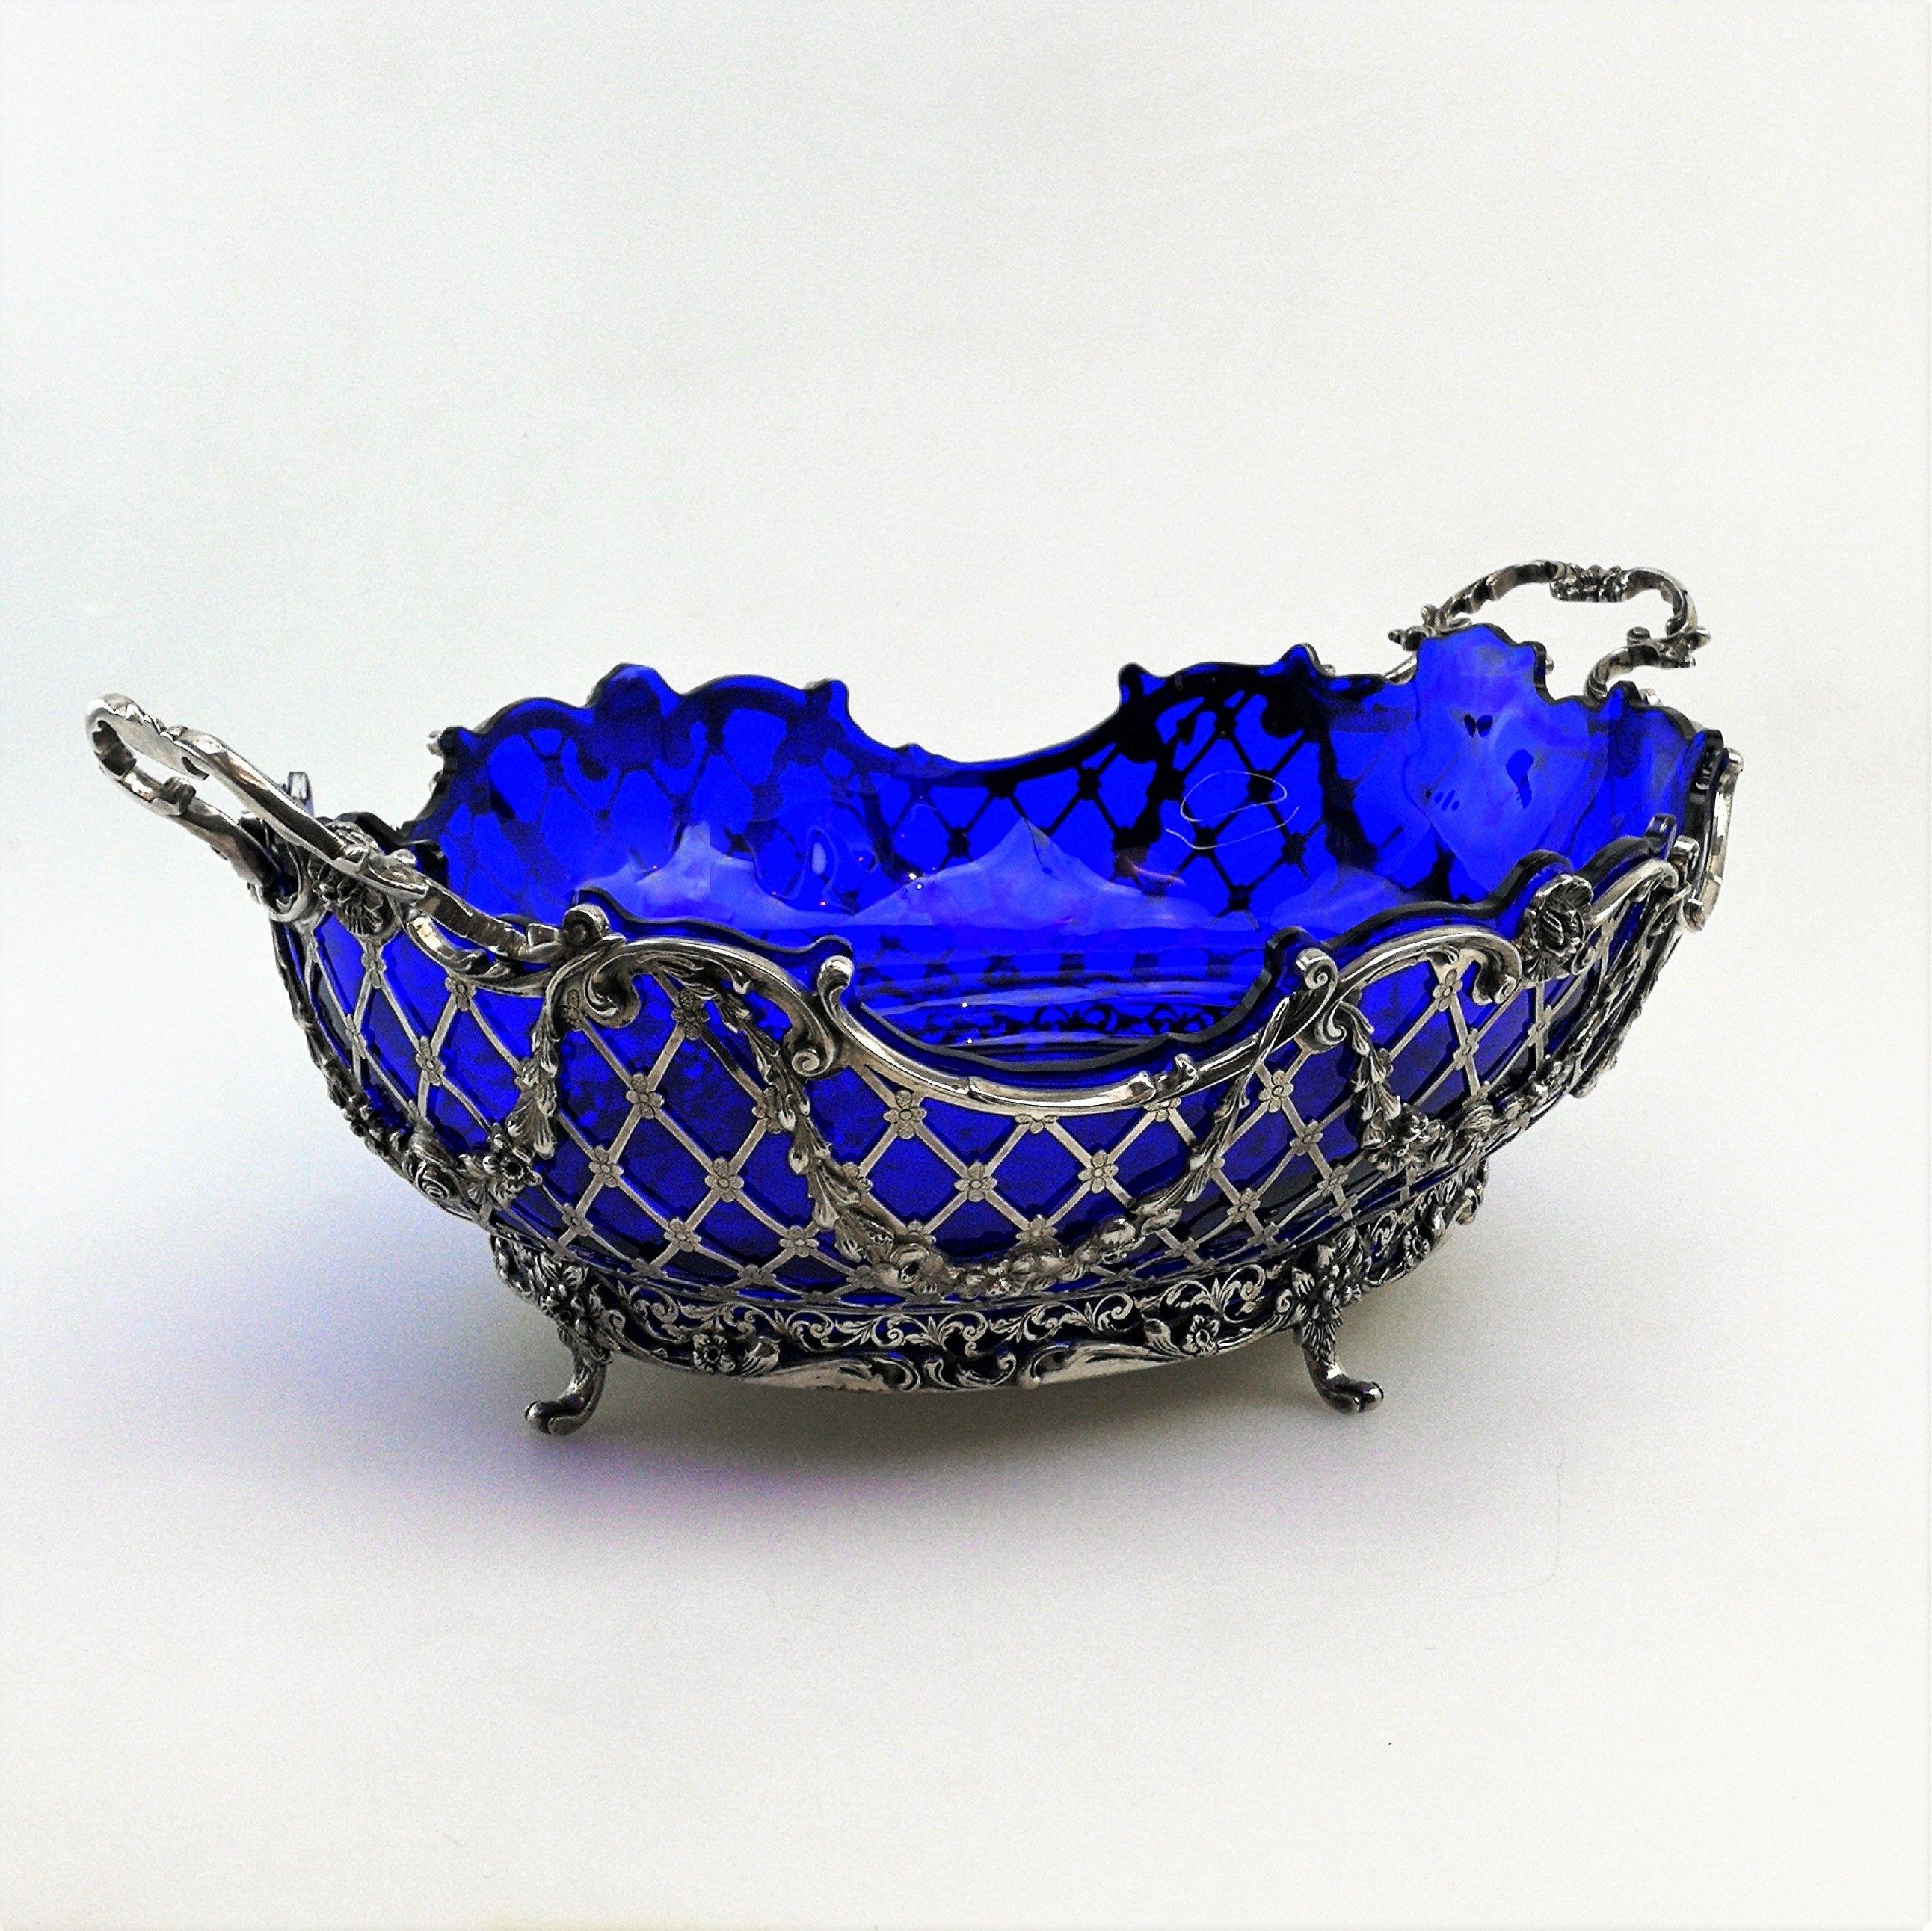 19th Century Large Antique German Solid Silver and Glass Basket / Bowl, circa 1890